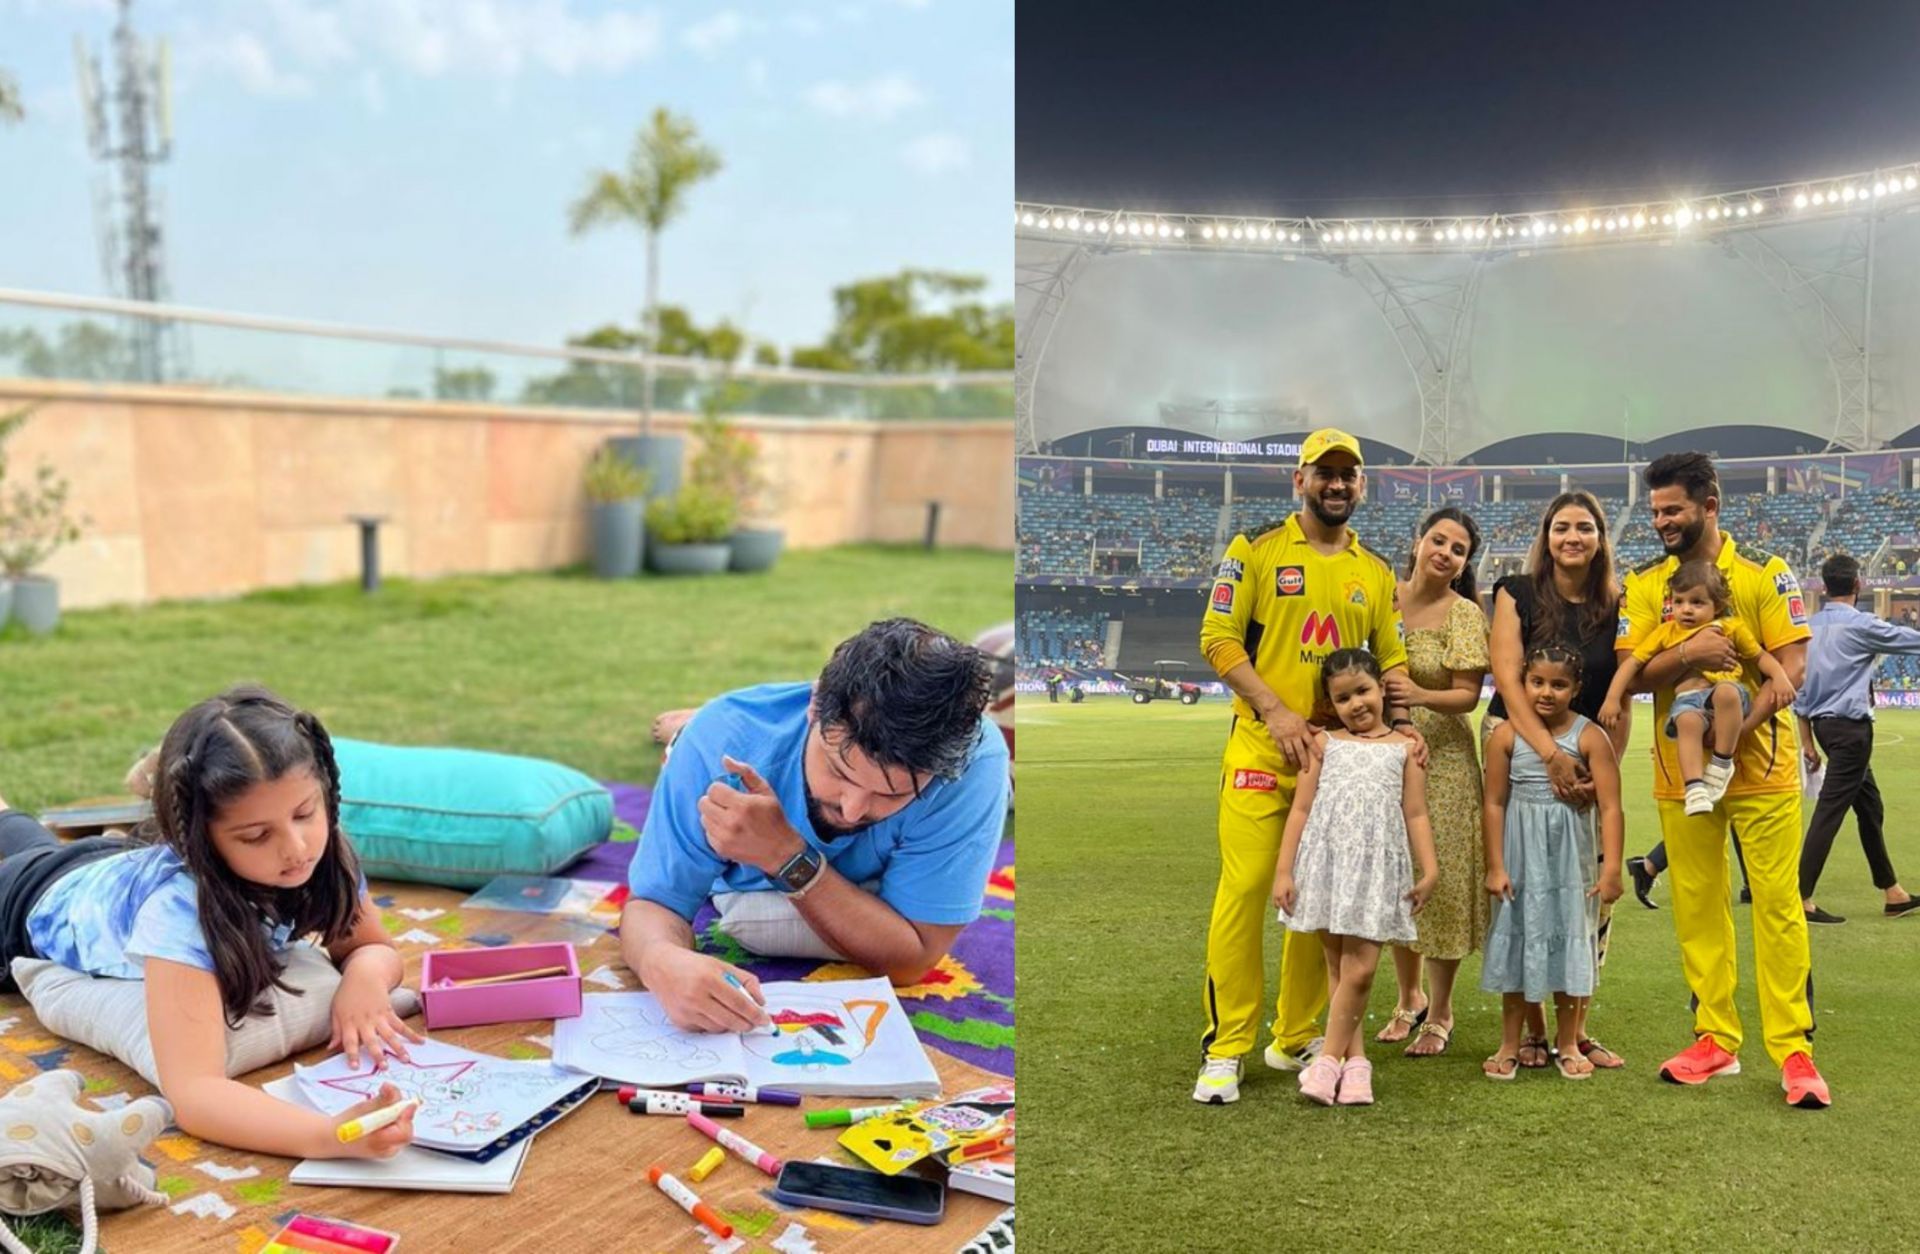 CSK star player Suresh Raina spends quality time with his daughter. PC: Instagram